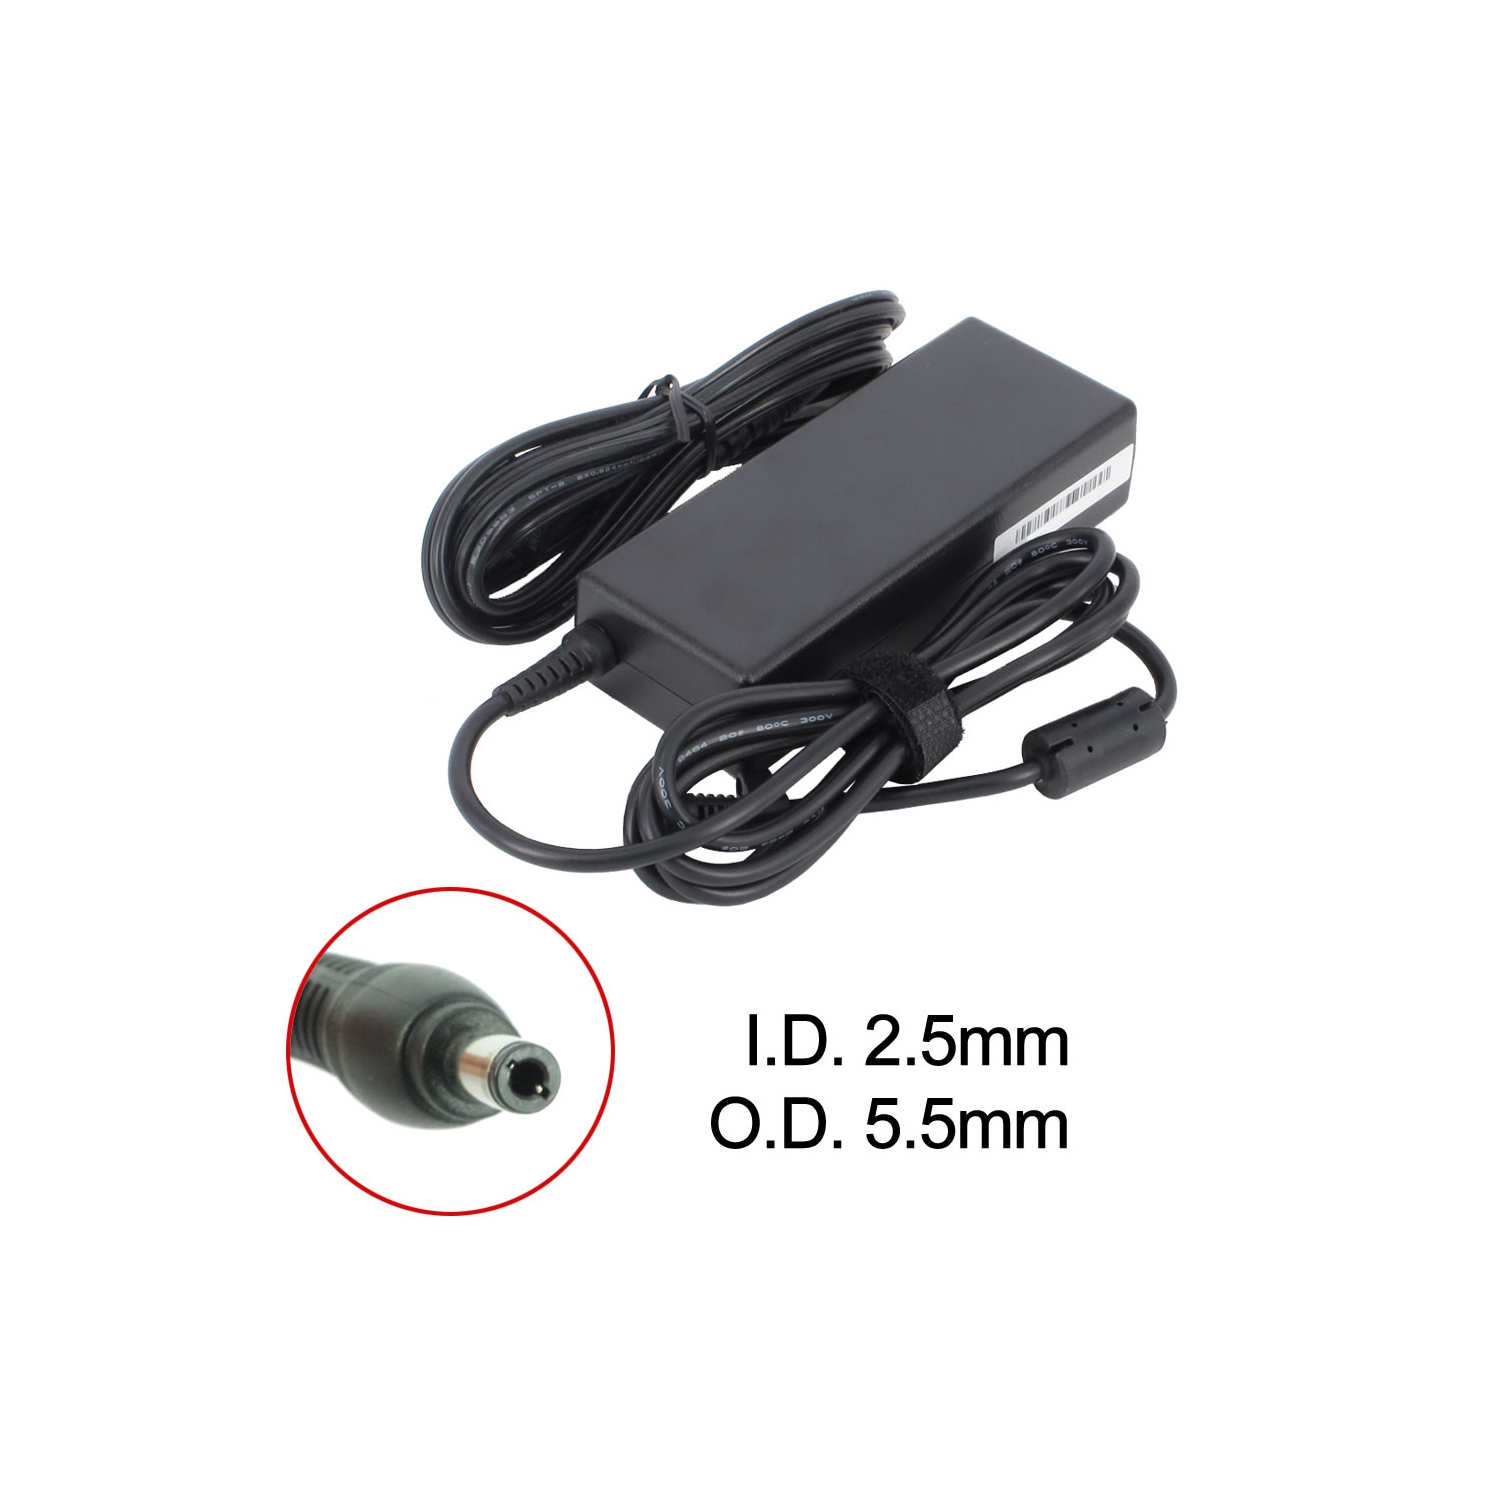 New Laptop AC Adapter for Acer Ferrari 4005, 0220A1990, 1528569, 90-N00PW5200T, ADP-65 HB BBCF, AZ121508, PA-1900-66